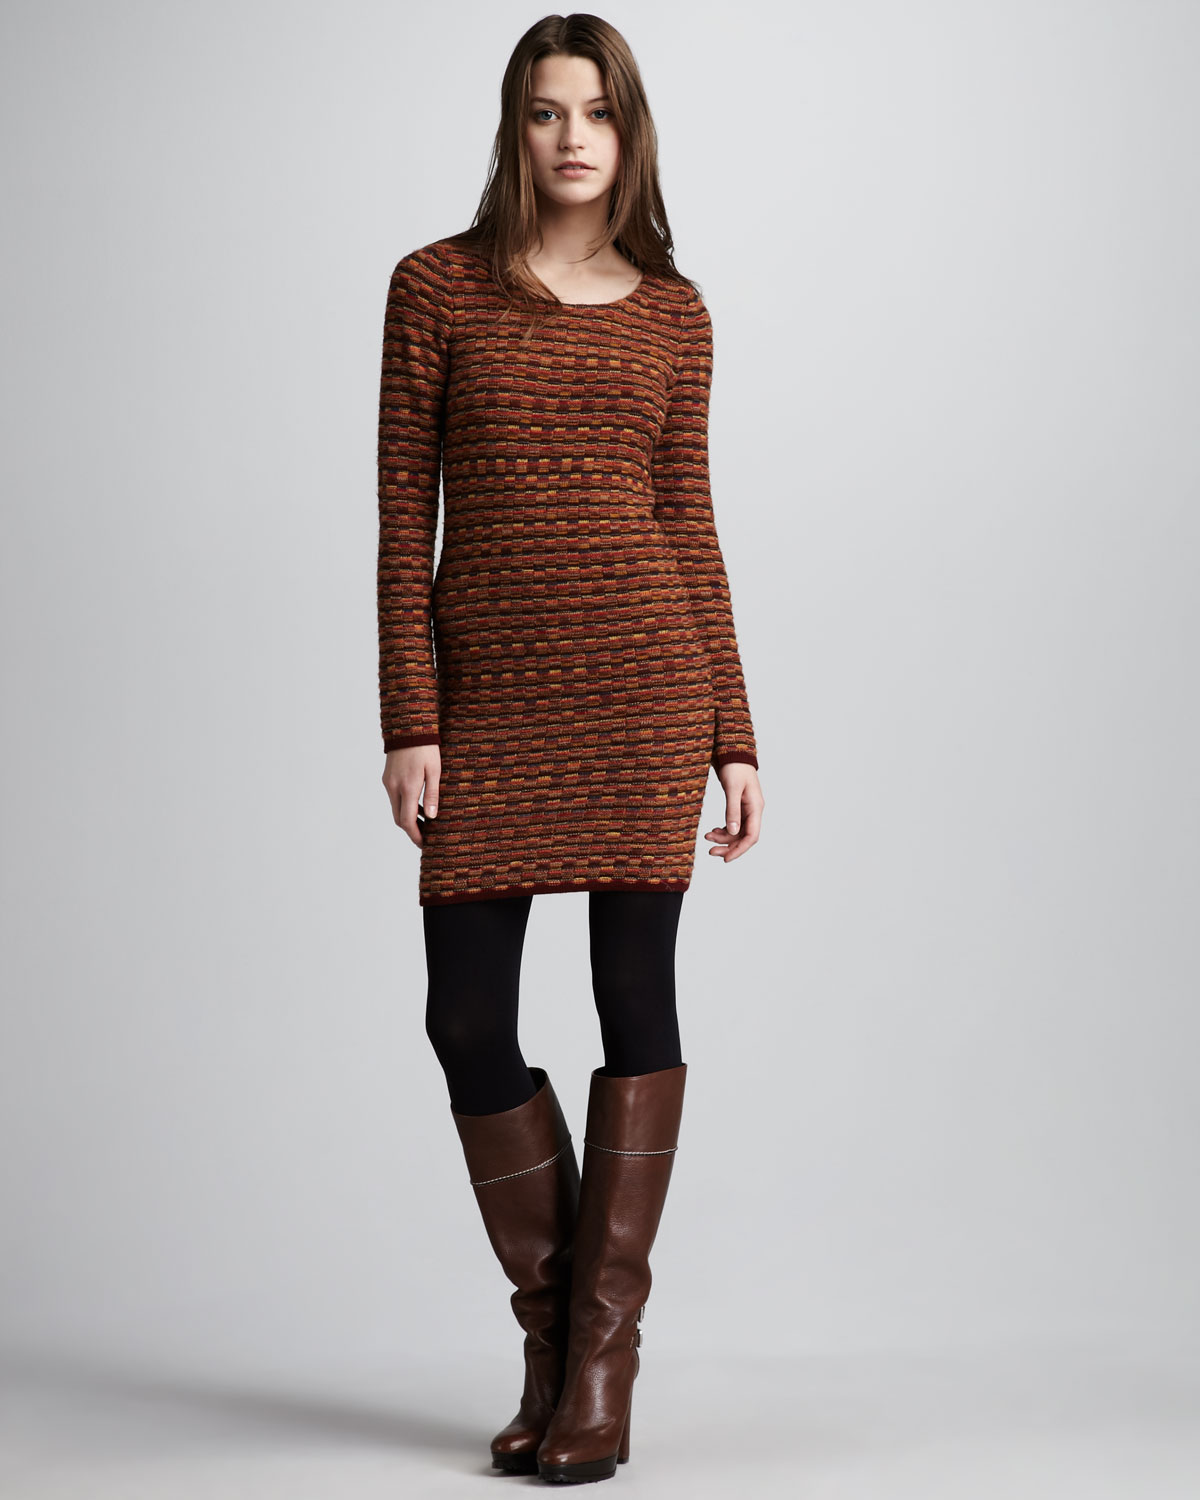 Alice + olivia Harriet Fitted Knit Dress in Brown | Lyst